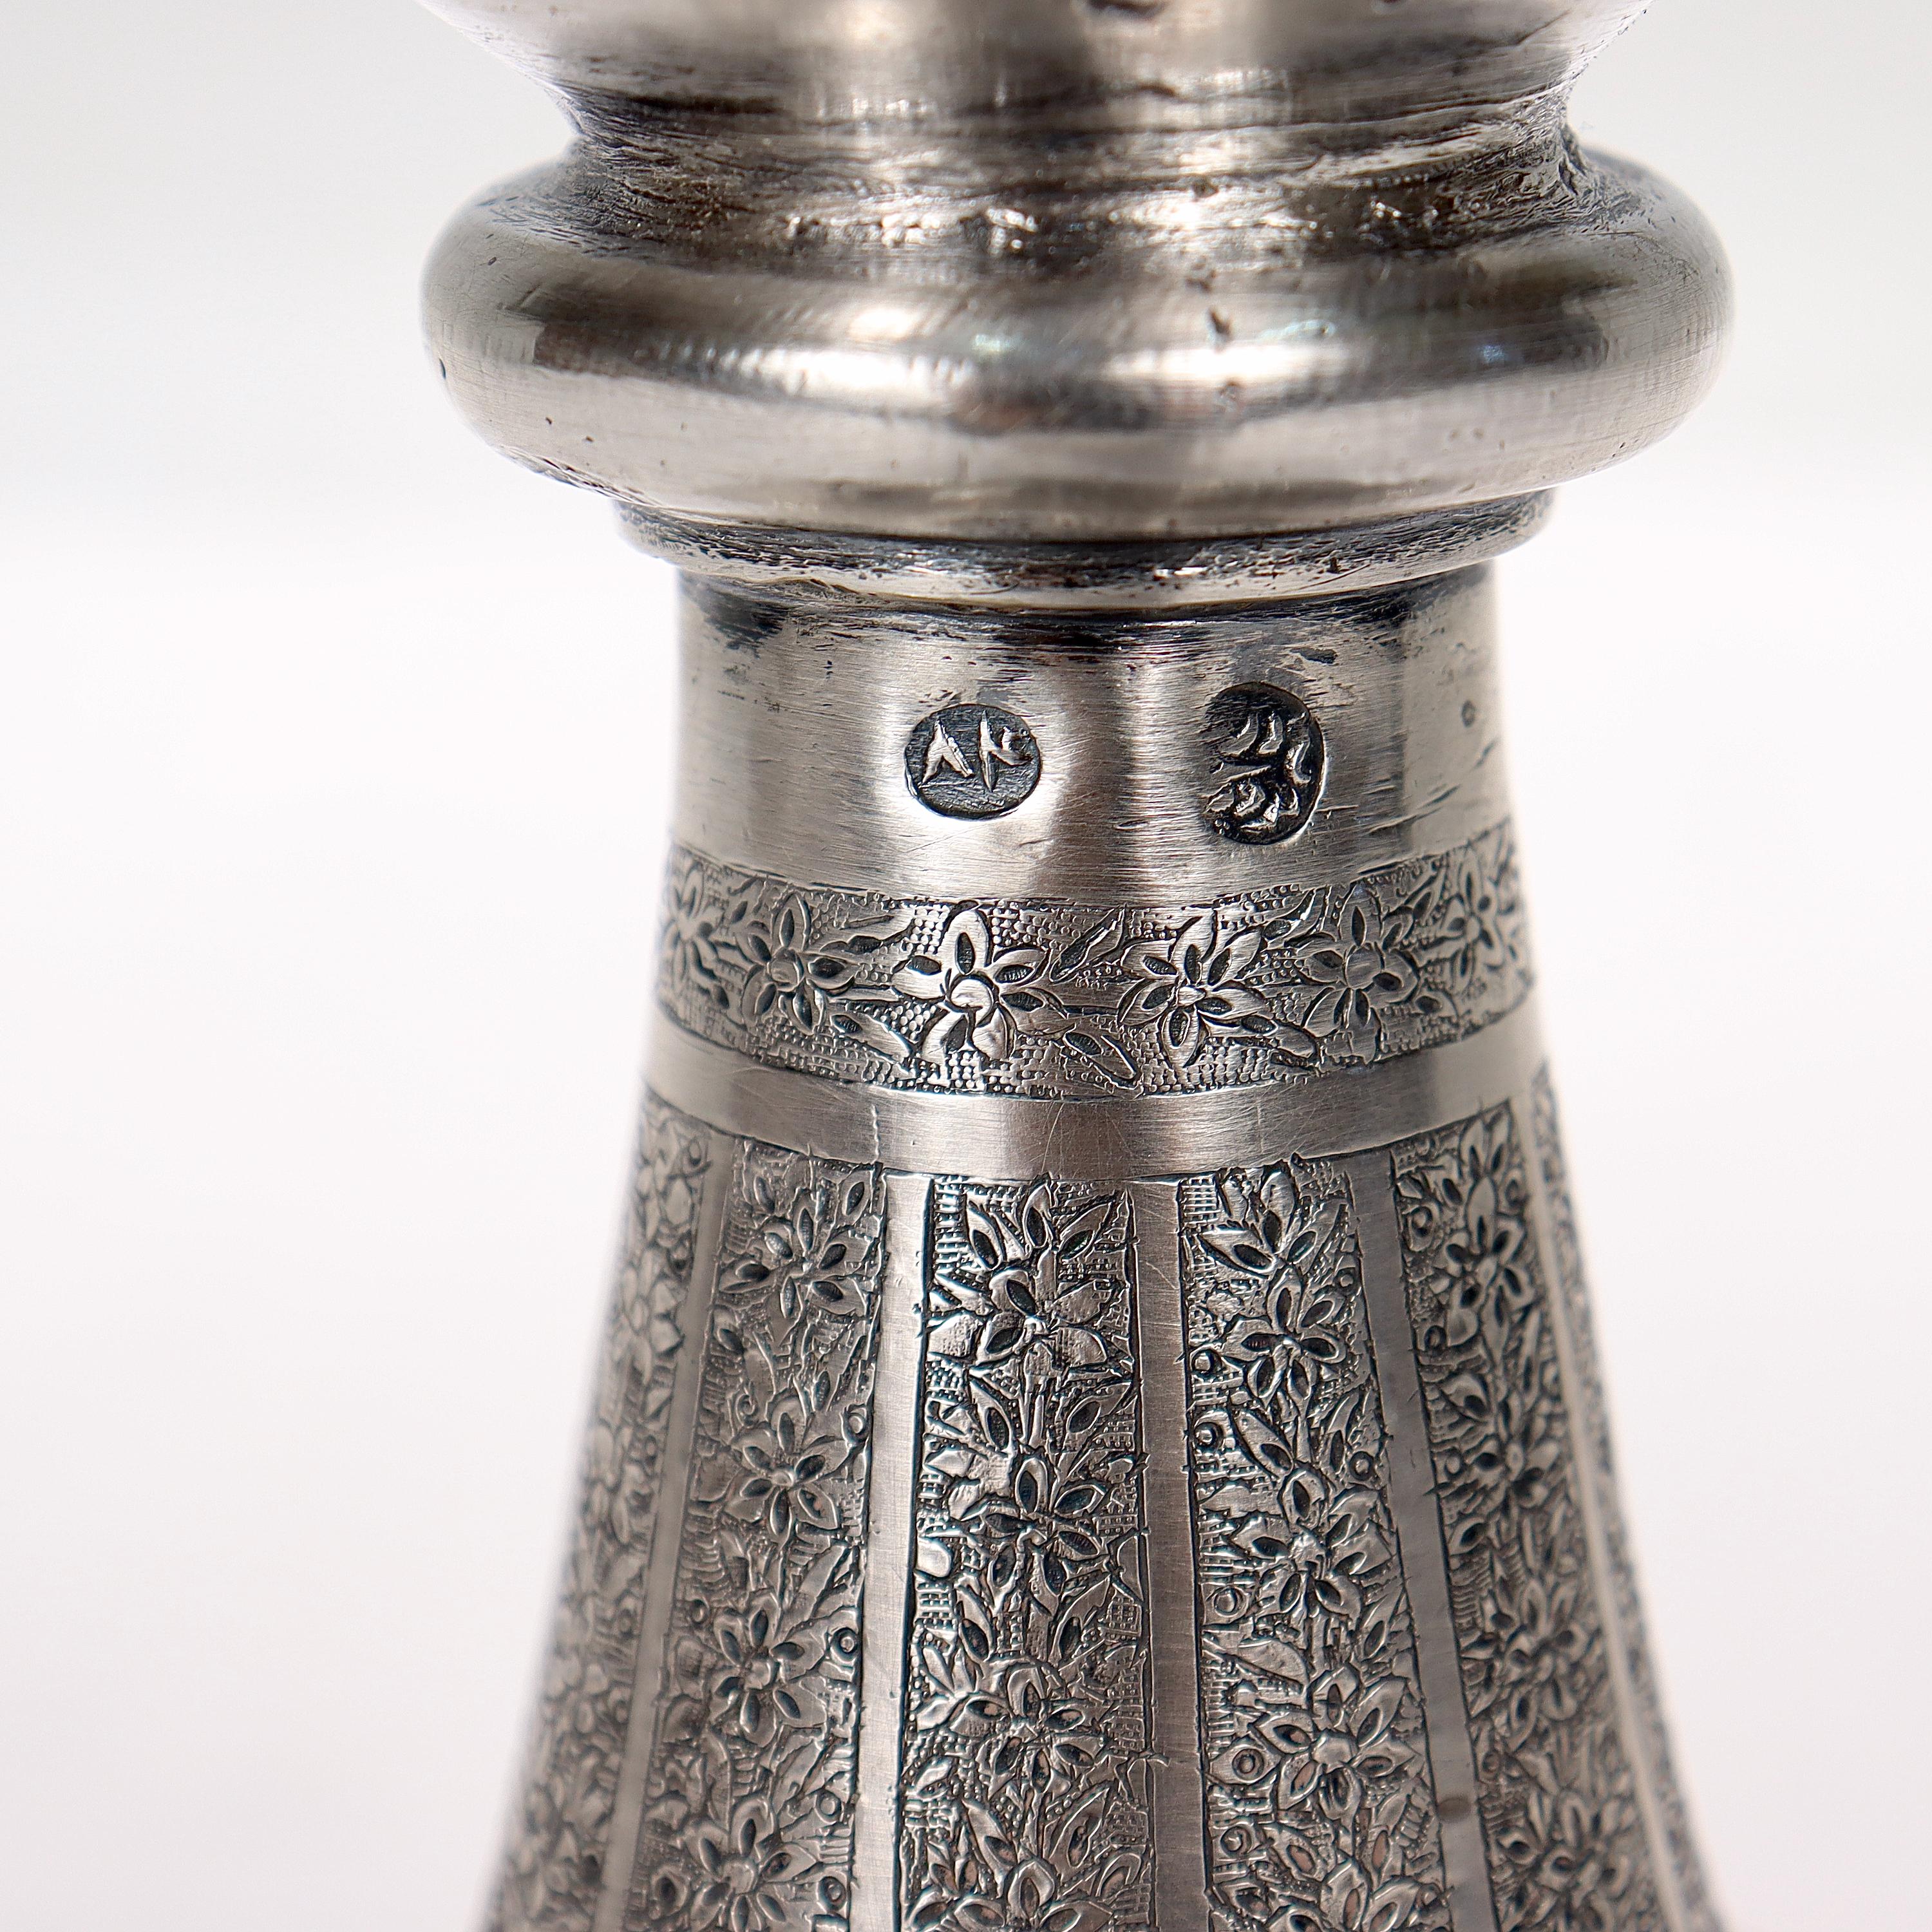 Large Twin-Handled Old or Antique Islamic Ottoman / Persian Repoussé Silver Vase For Sale 7